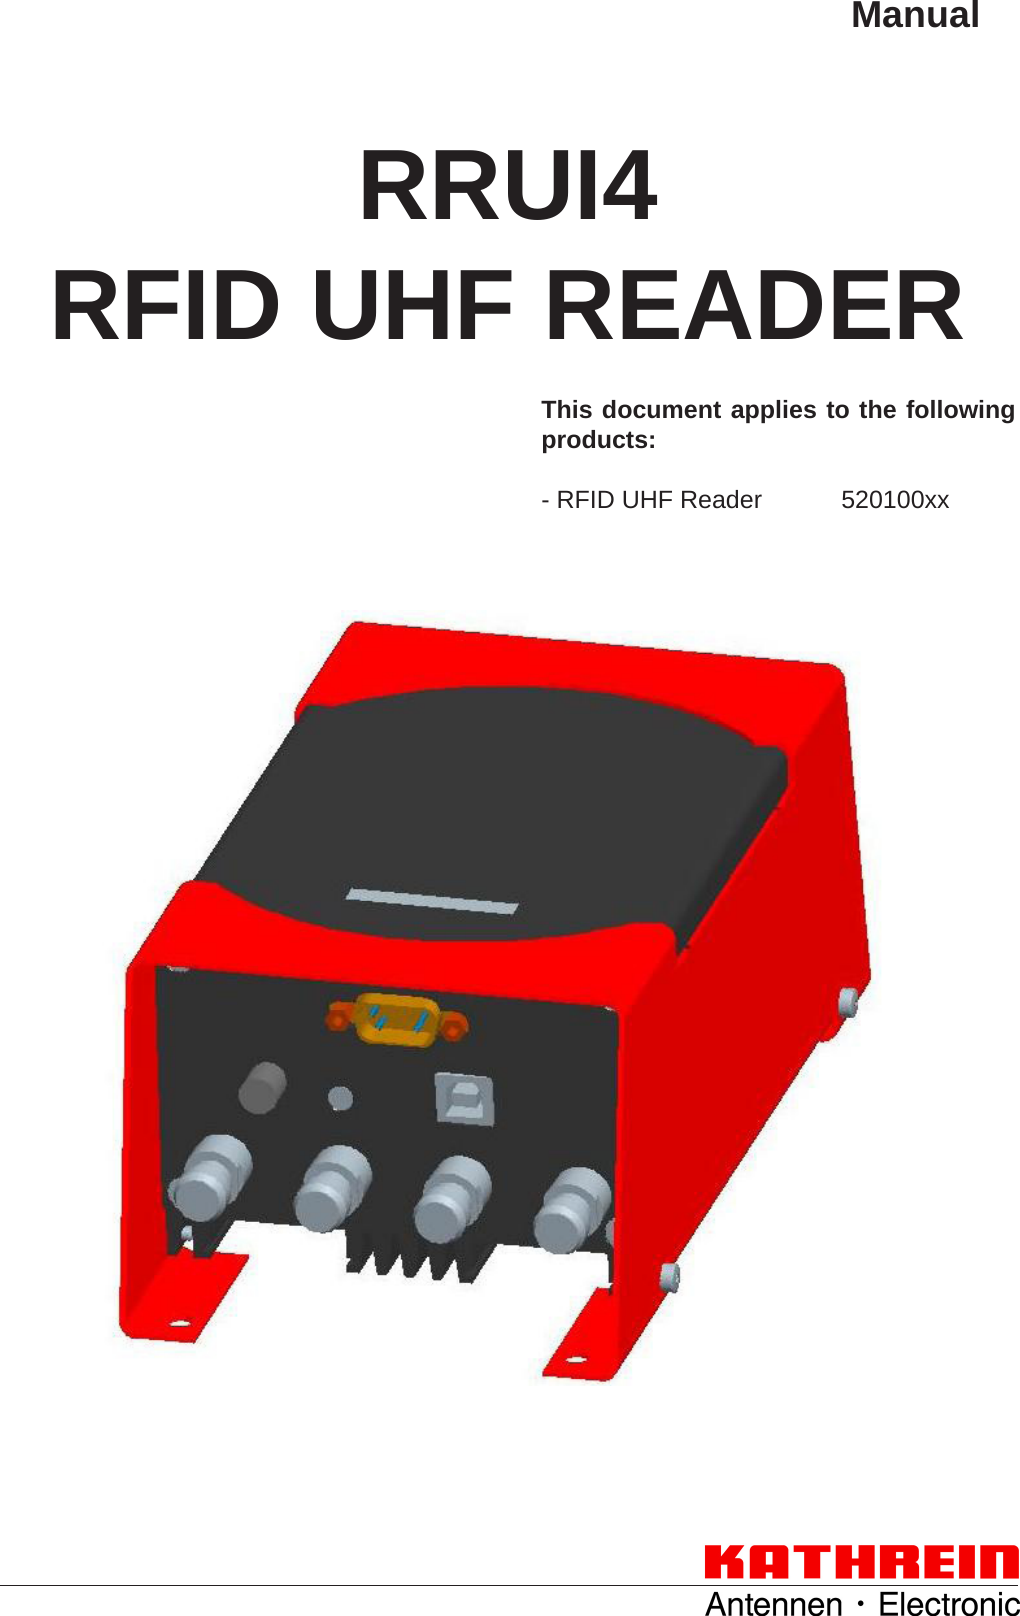 ManualRRUI4RFID UHF READERThis document applies to the following products:- RFID UHF Reader   520100xx